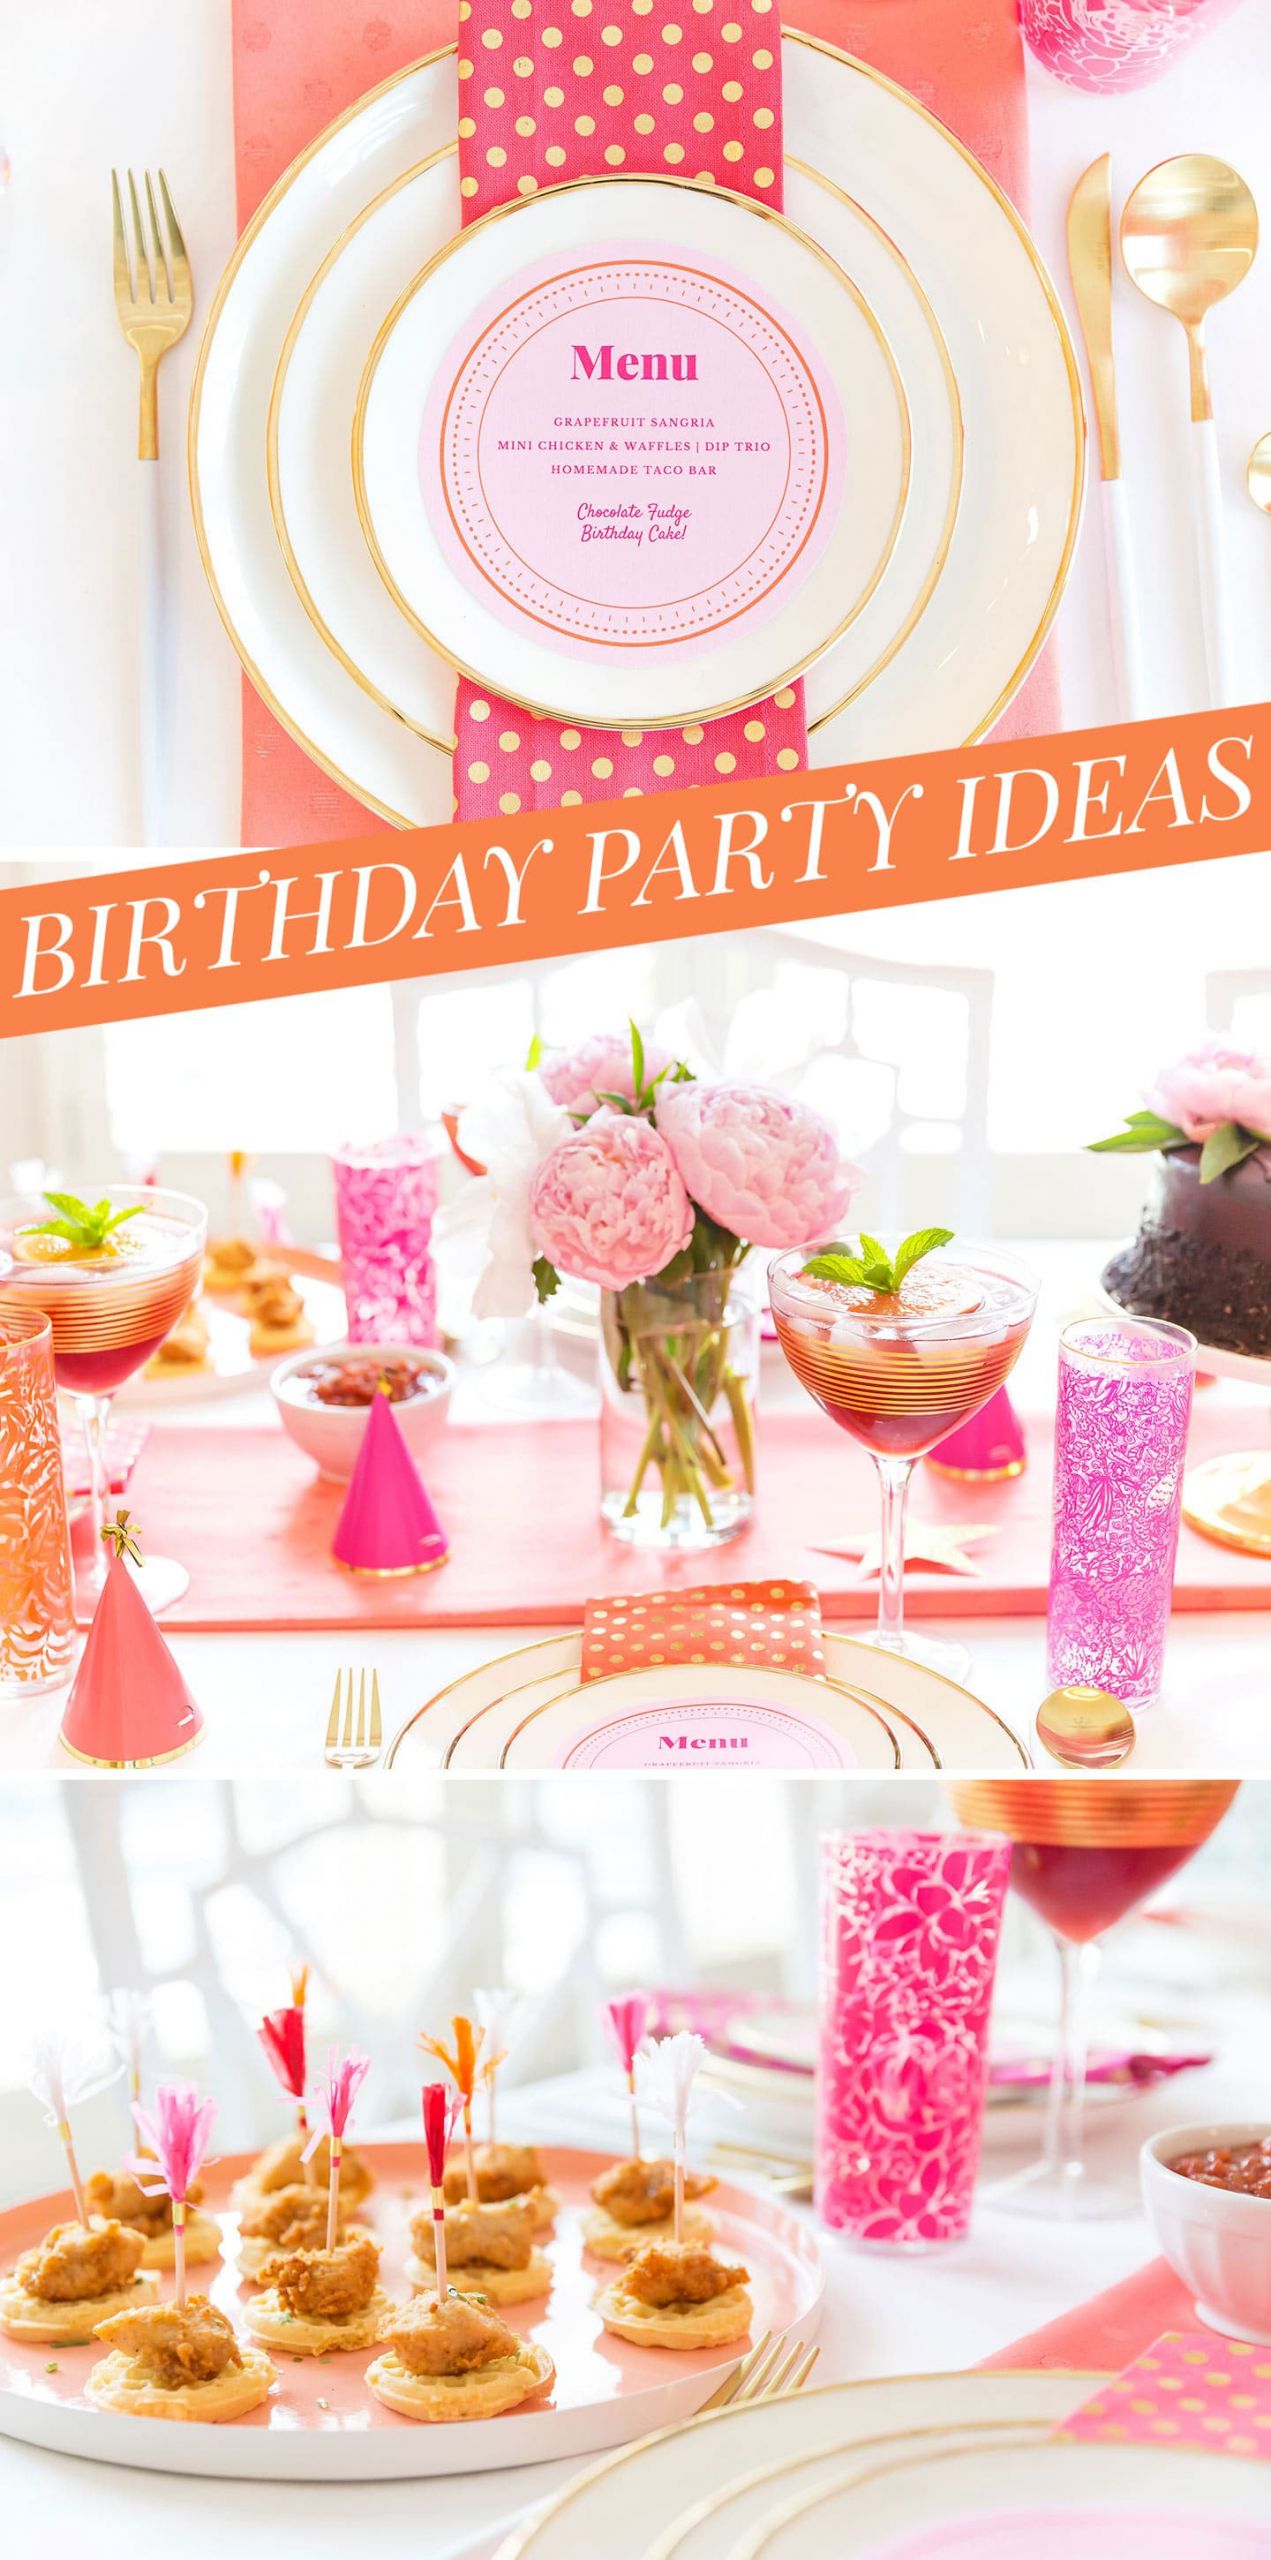 Adult Birthday Party Themes
 Creative Adult Birthday Party Ideas for the Girls